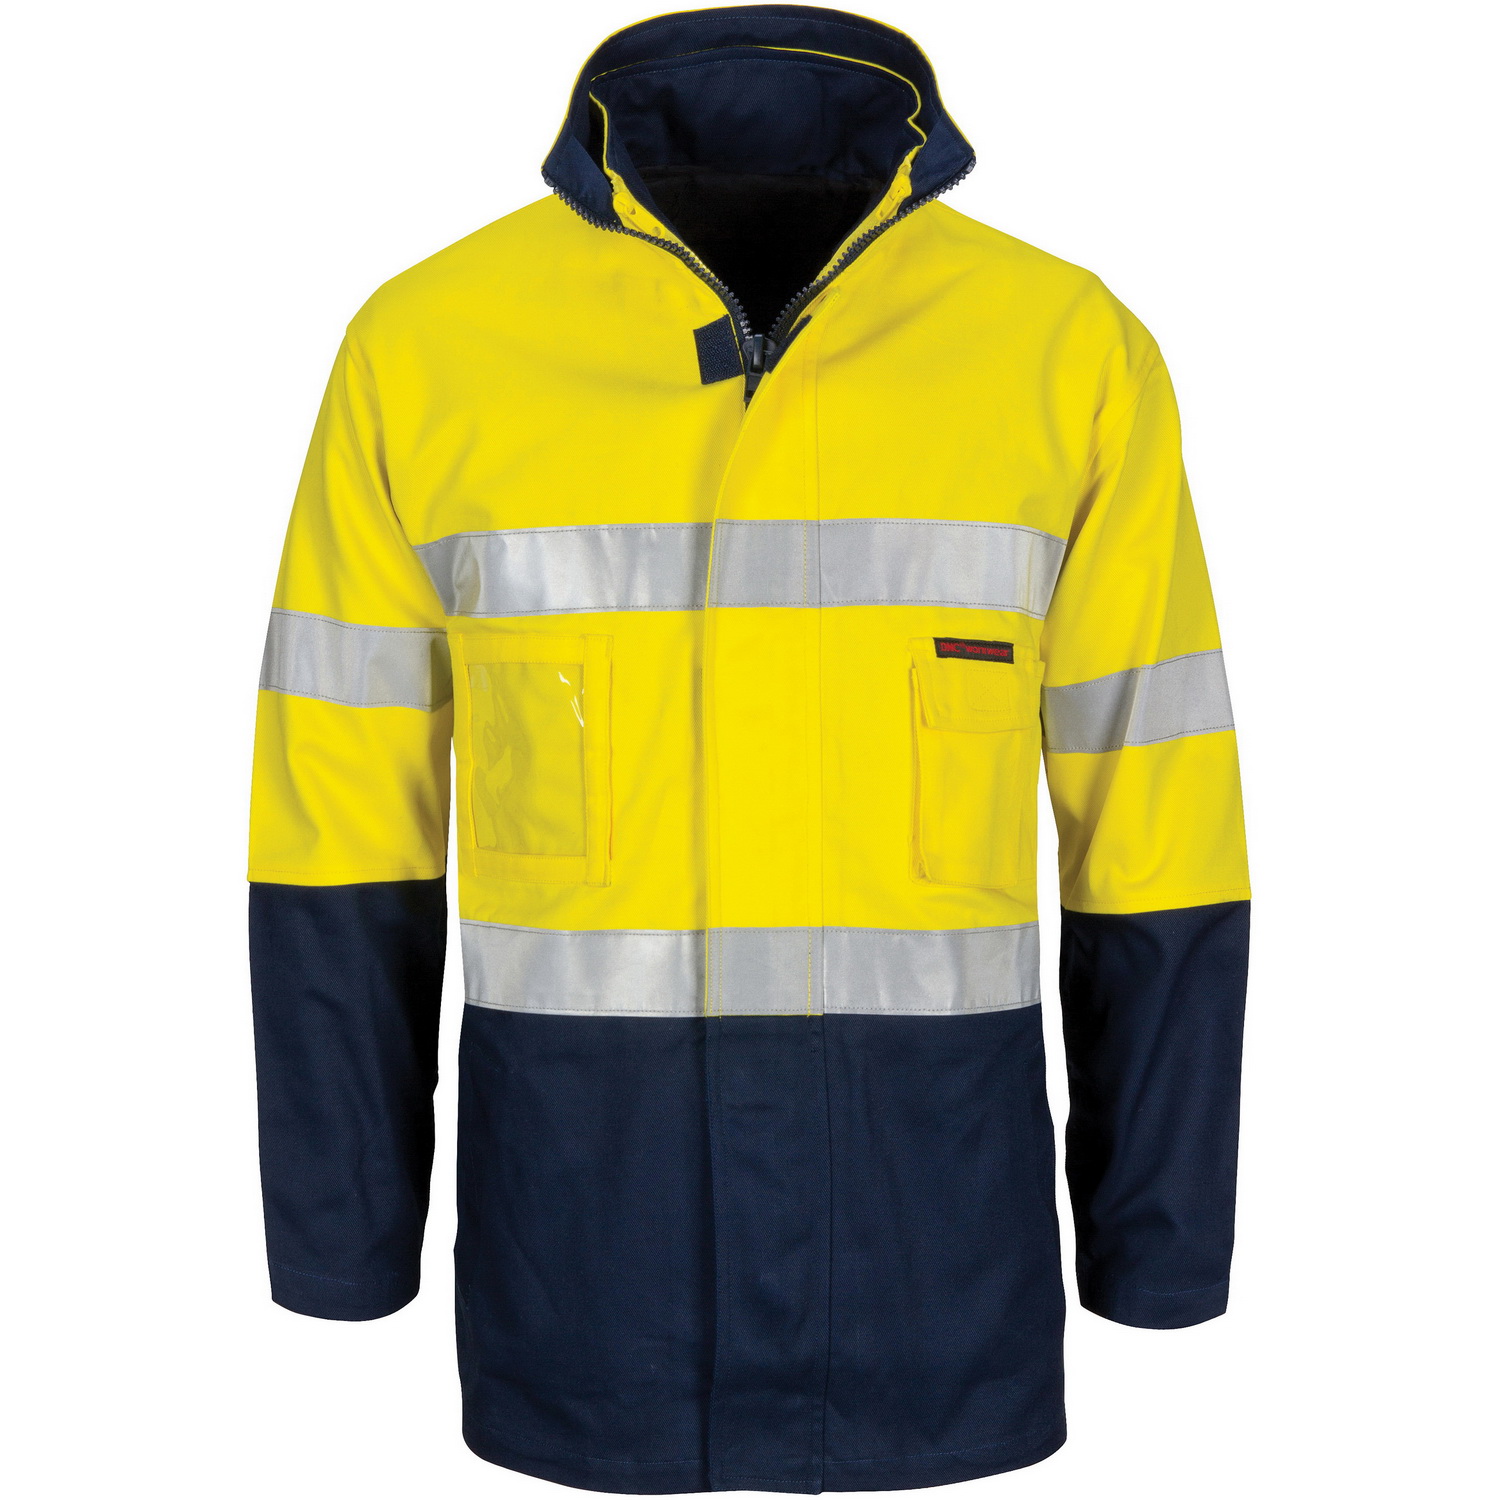 HiVis "4 IN 1" Cotton Drill Jacket with Generic R/Tape